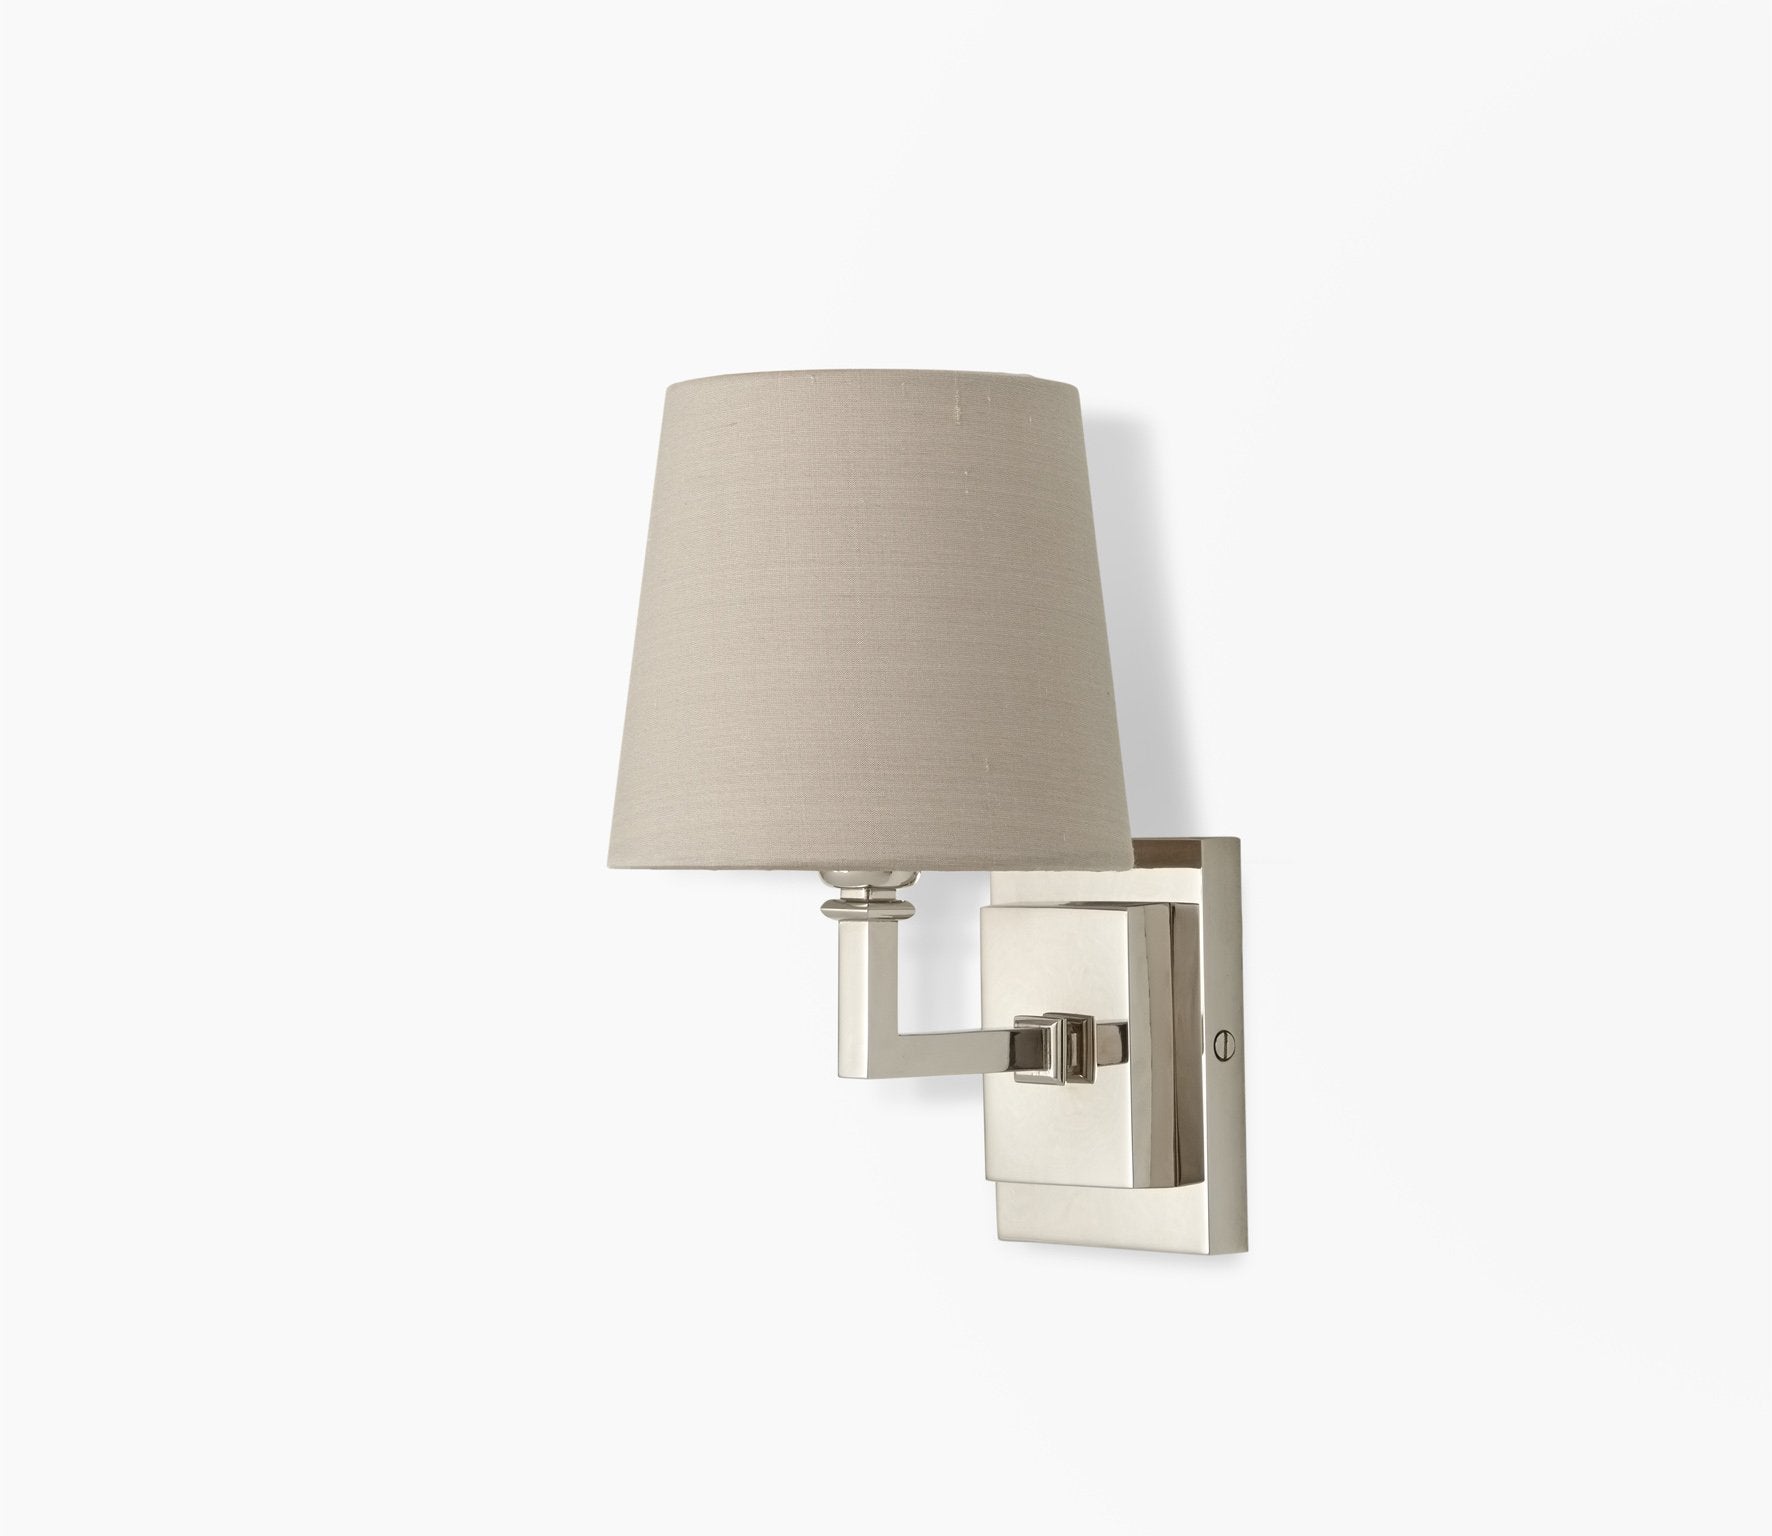 Parker Wall Light with Drum Shade Product Image 6